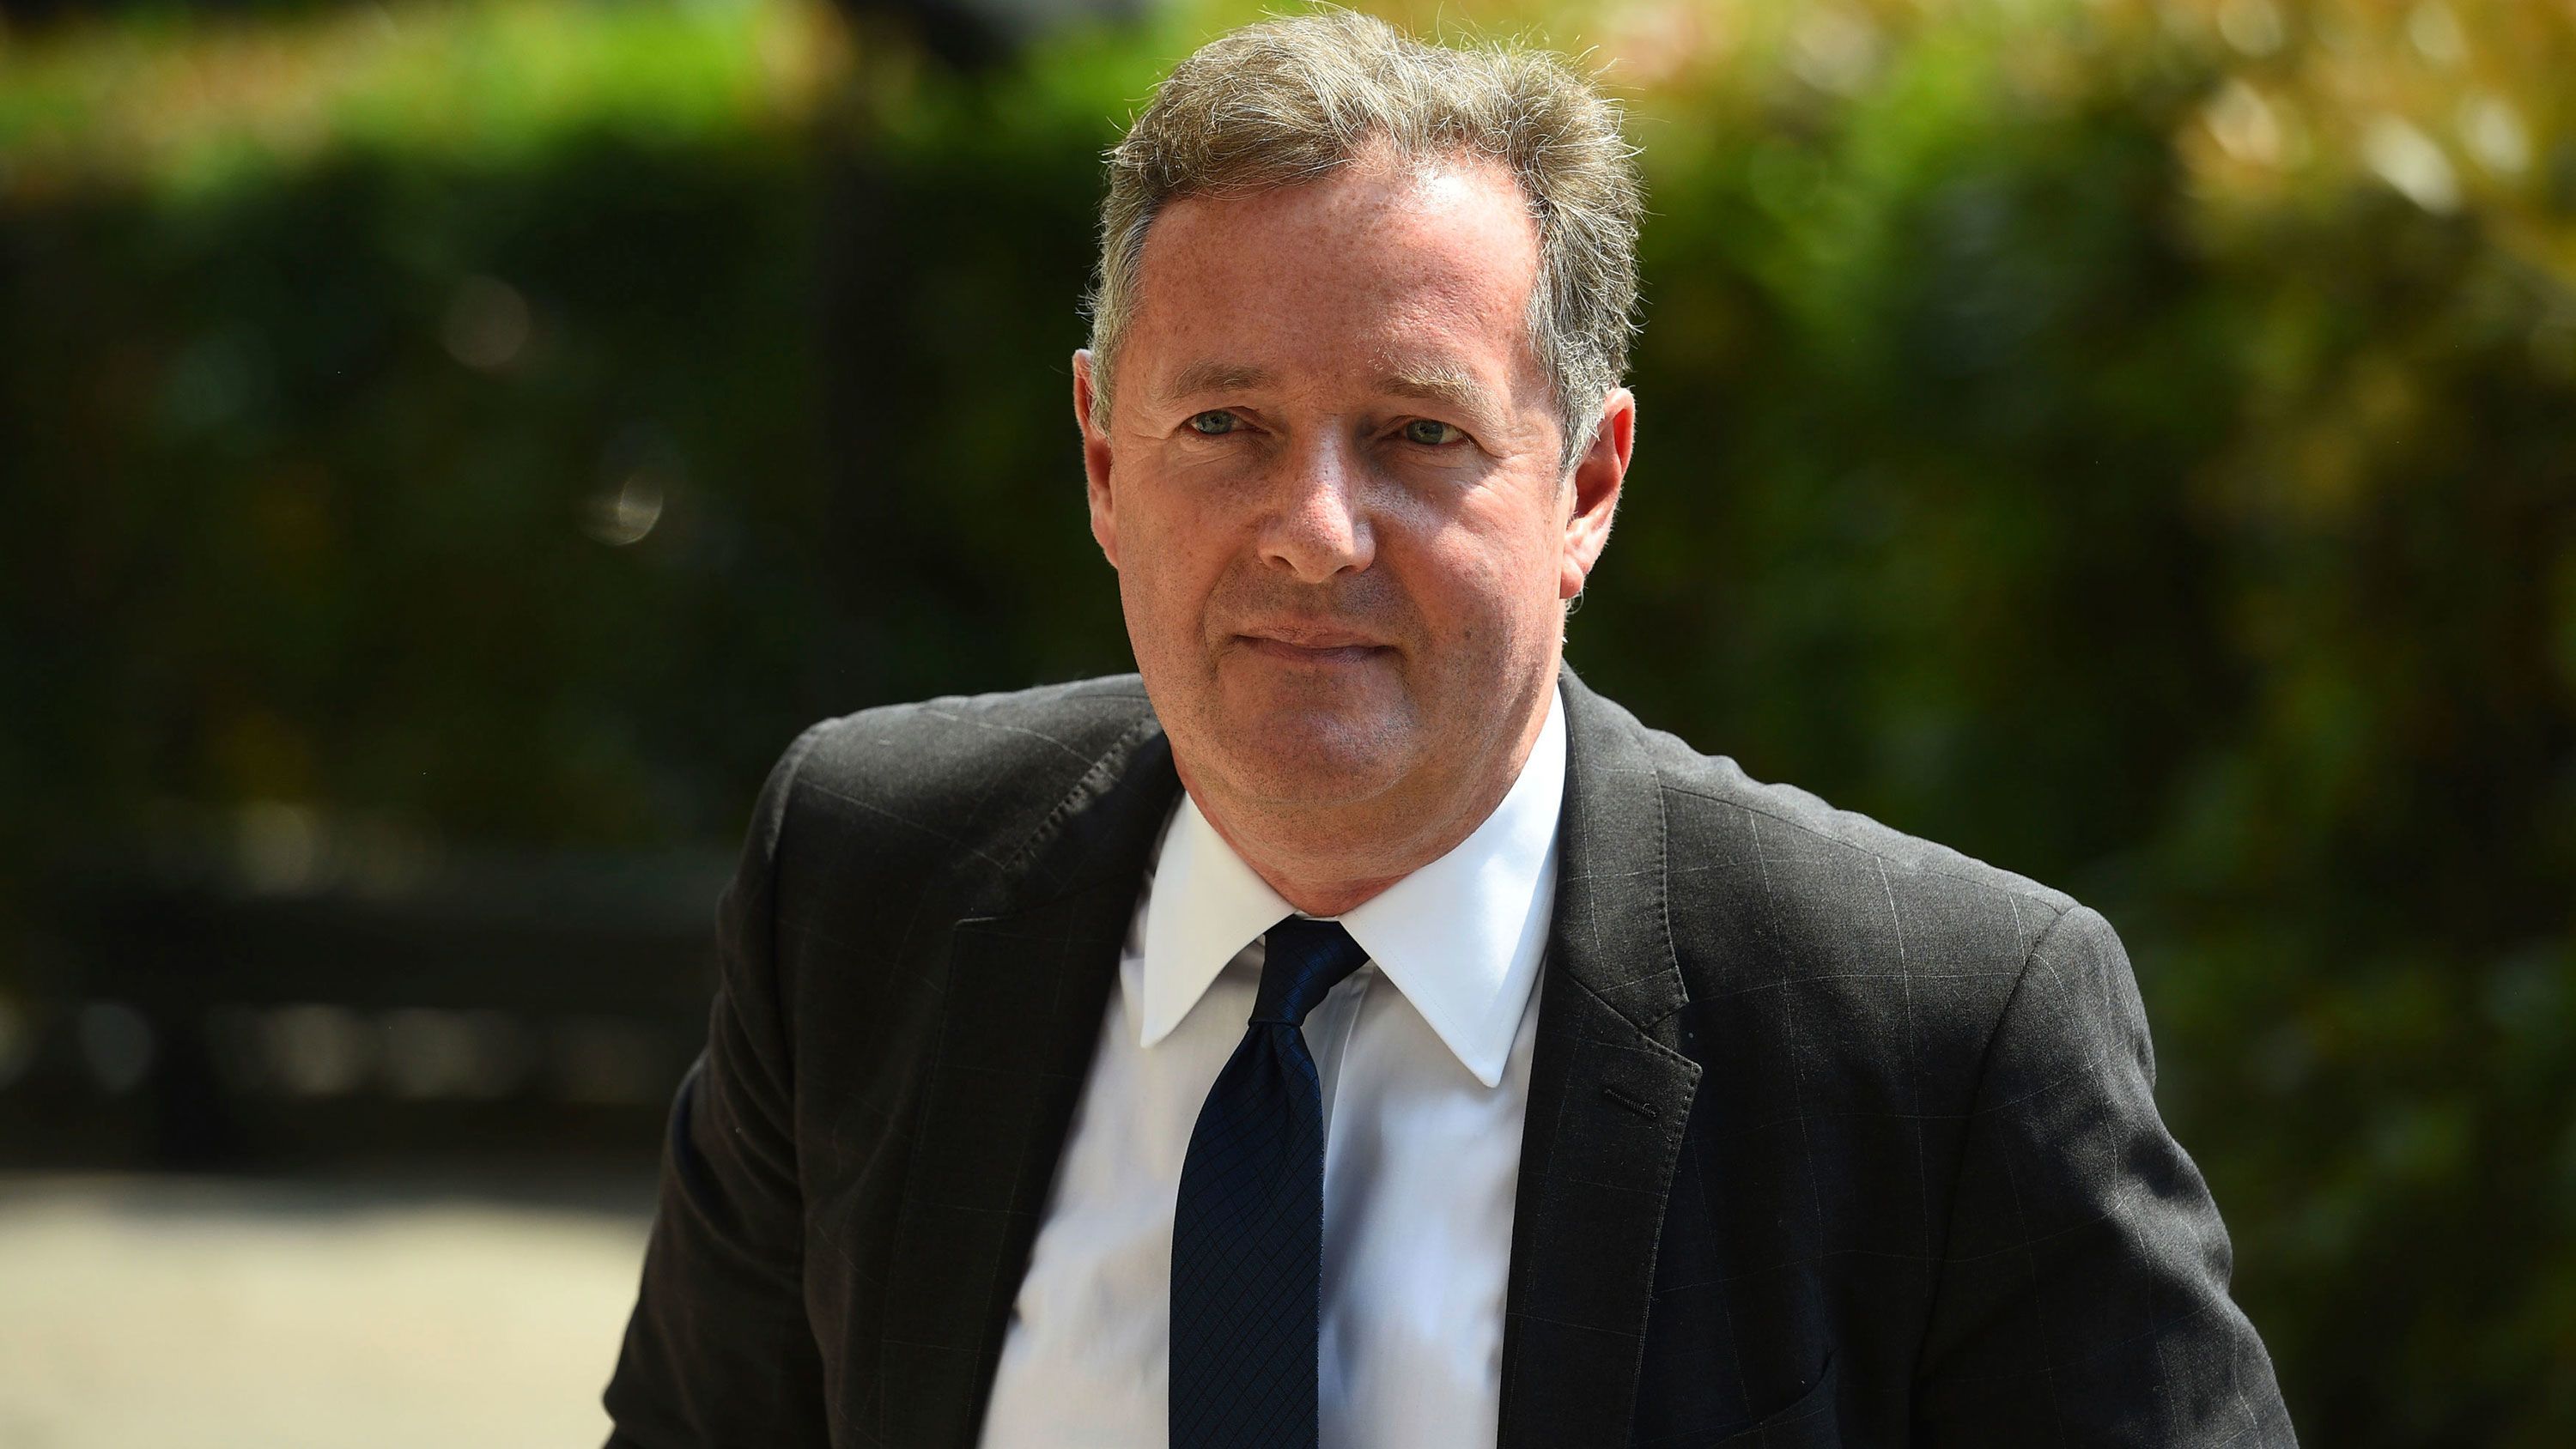 Andrew Tate becomes victim of death hoax as Piers Morgan's Twitter